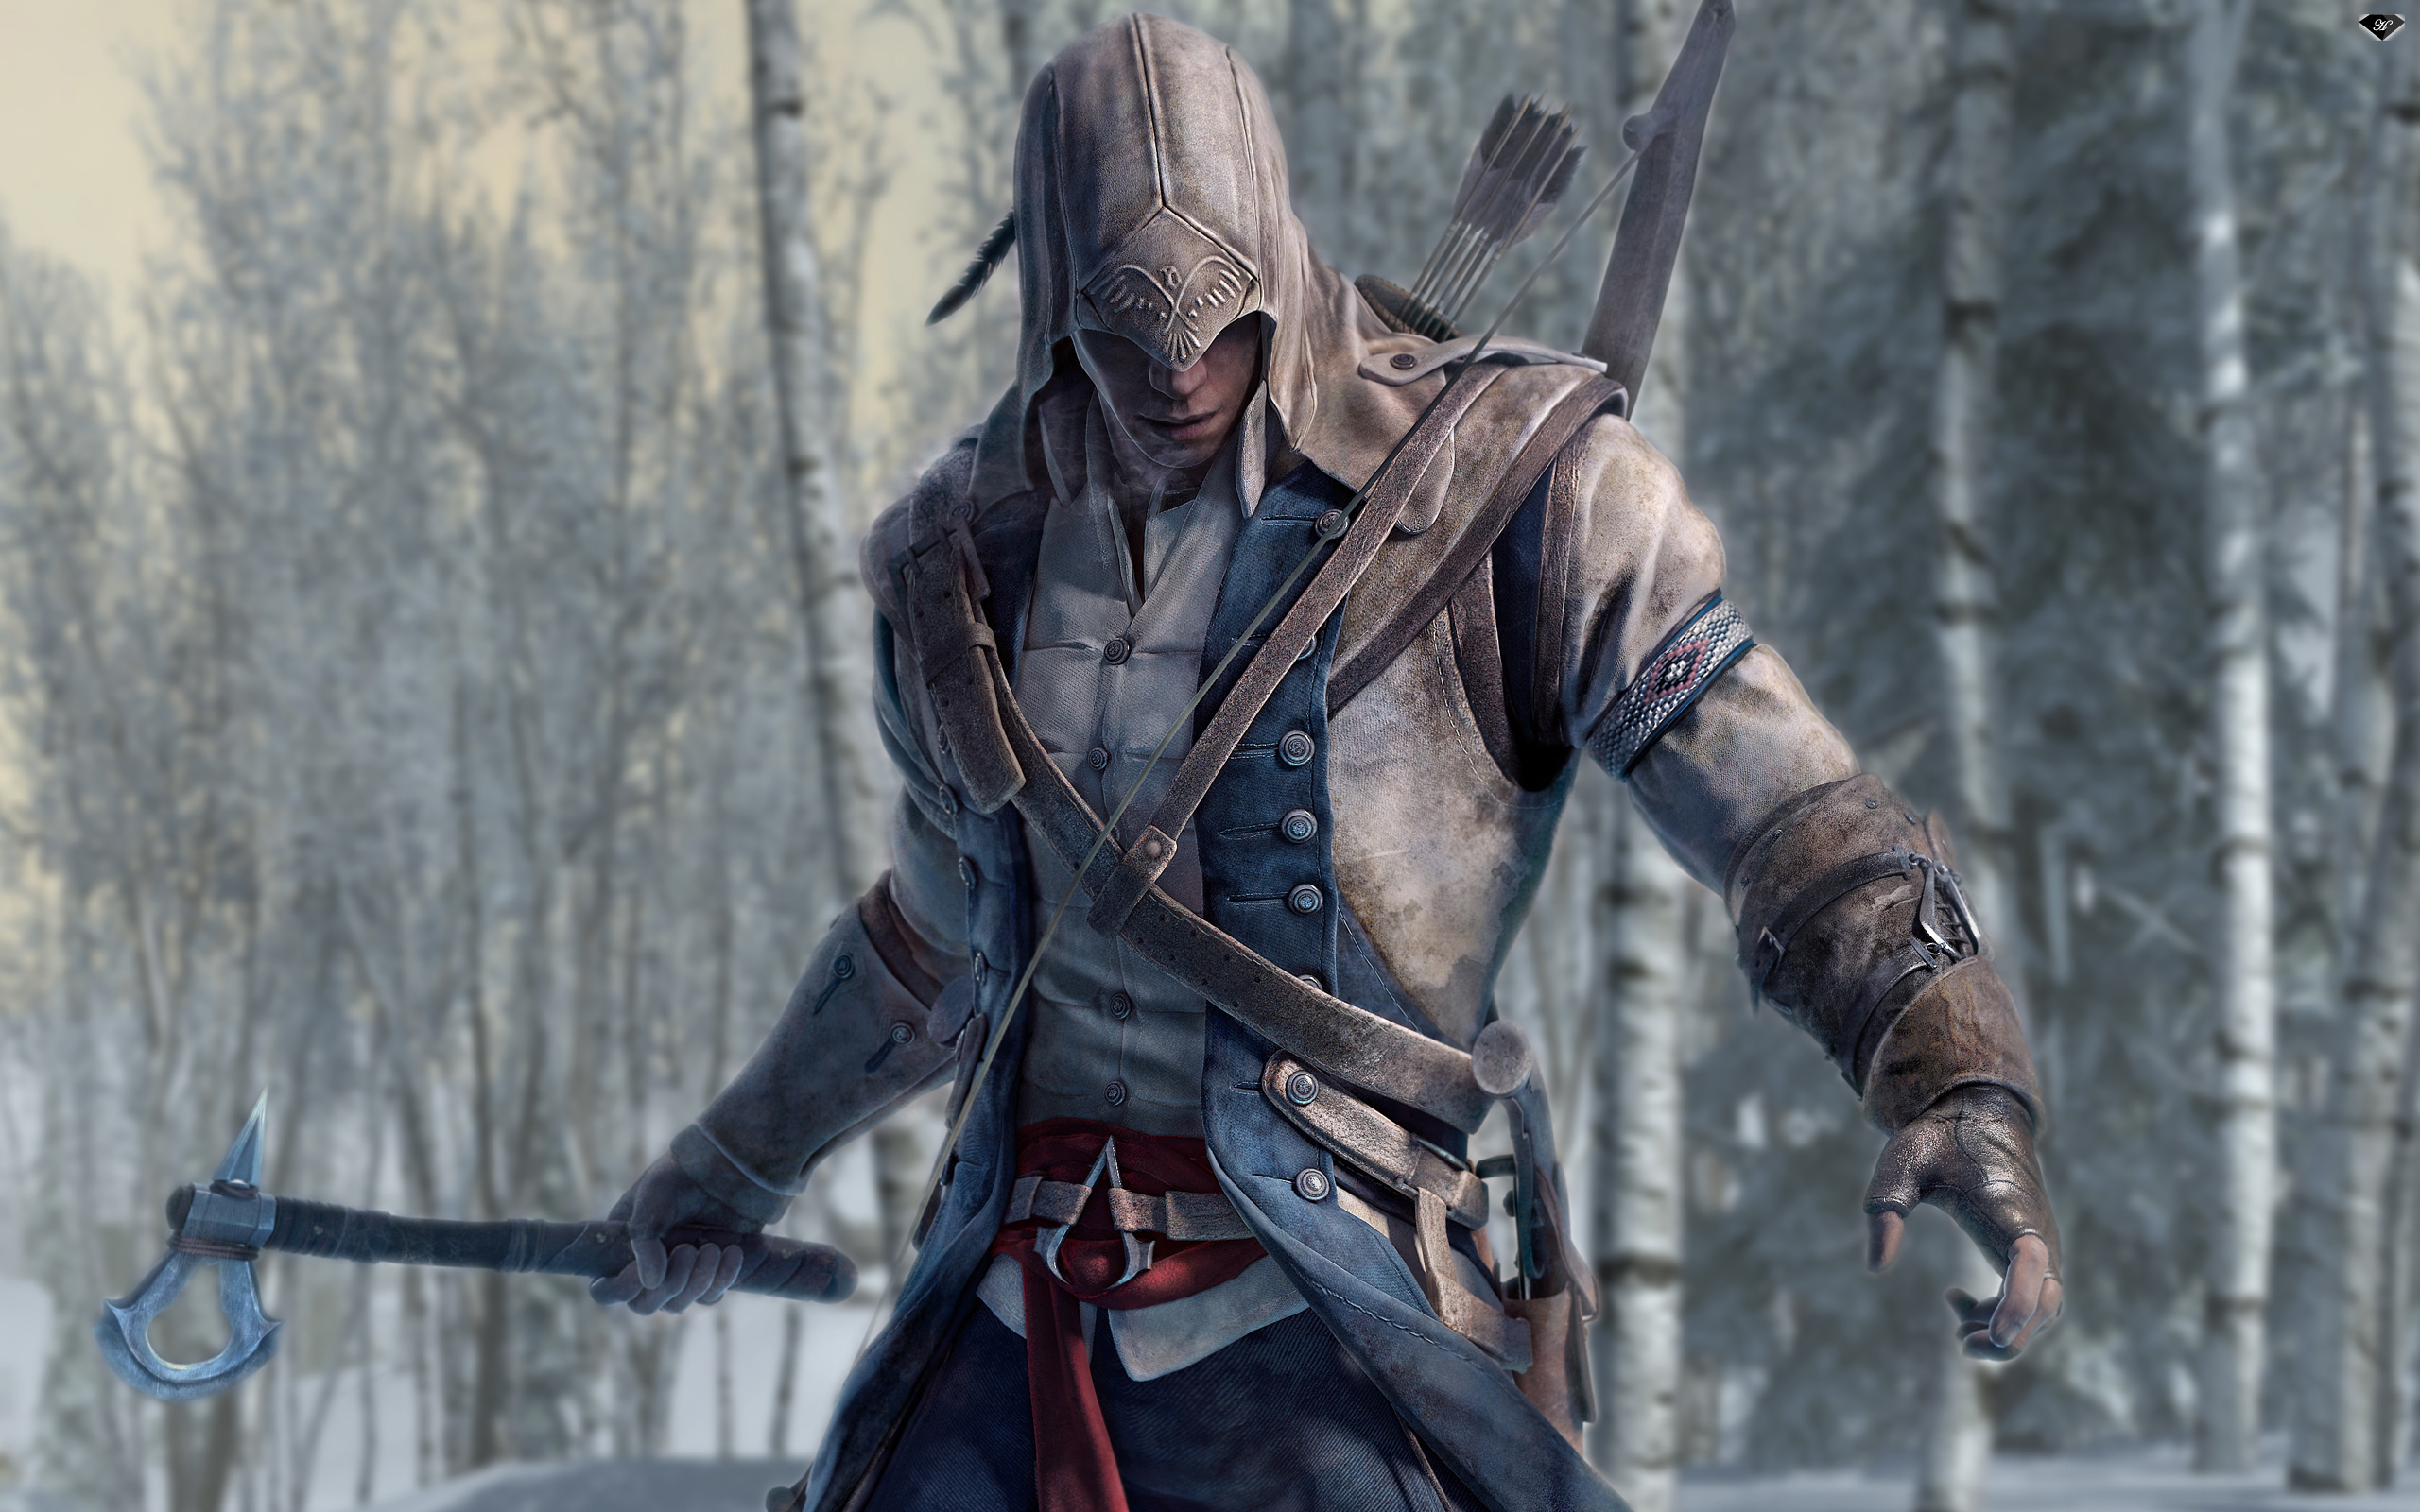 video game, assassin's creed iii, assassin's creed, connor (assassin's creed)